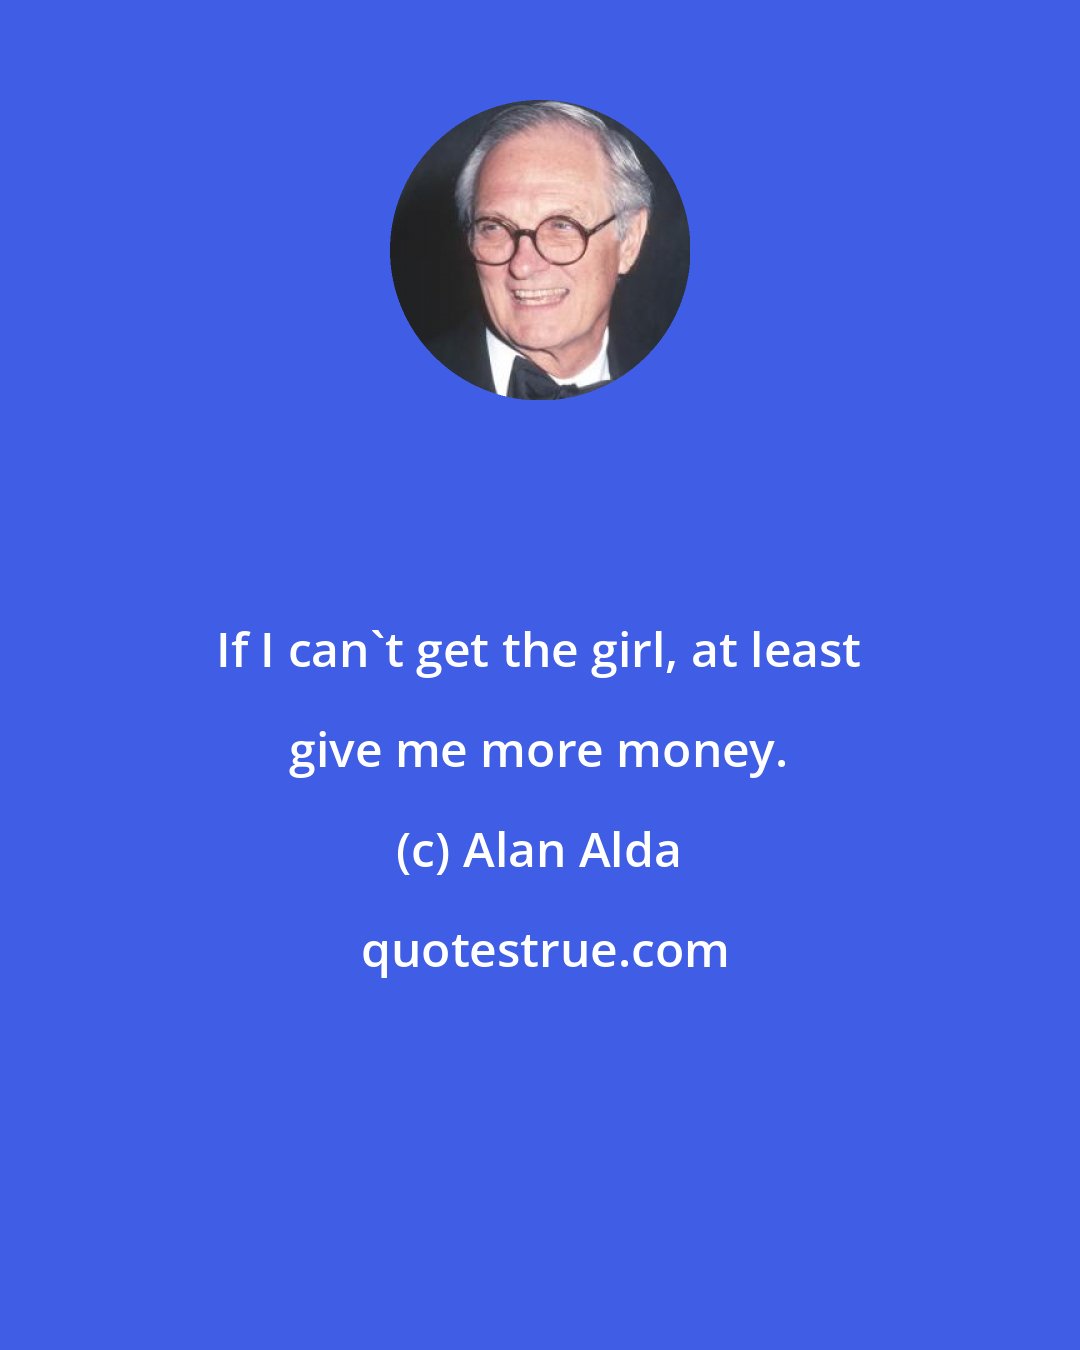 Alan Alda: If I can't get the girl, at least give me more money.